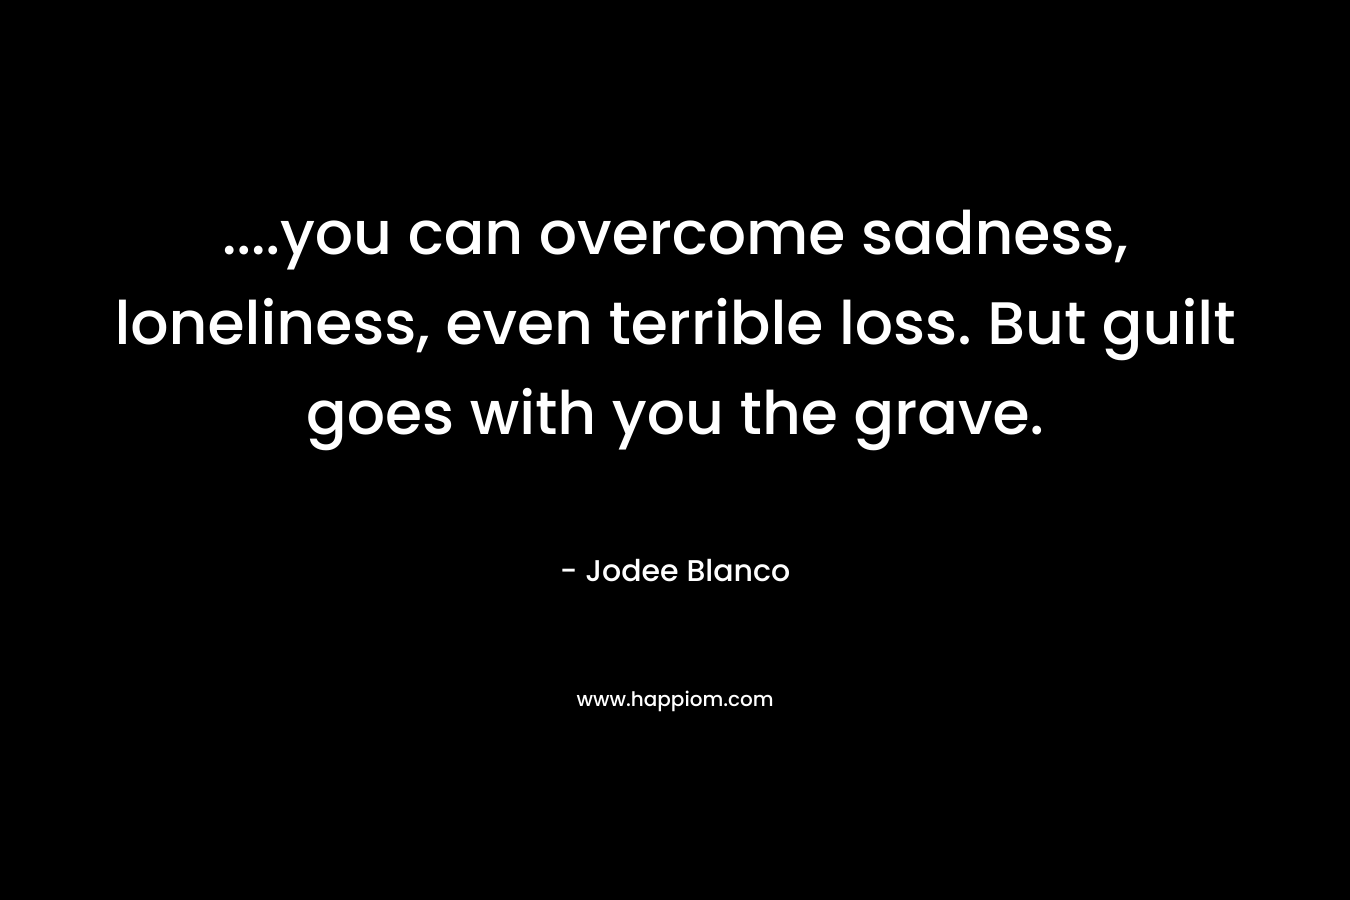 ….you can overcome sadness, loneliness, even terrible loss. But guilt goes with you the grave. – Jodee Blanco